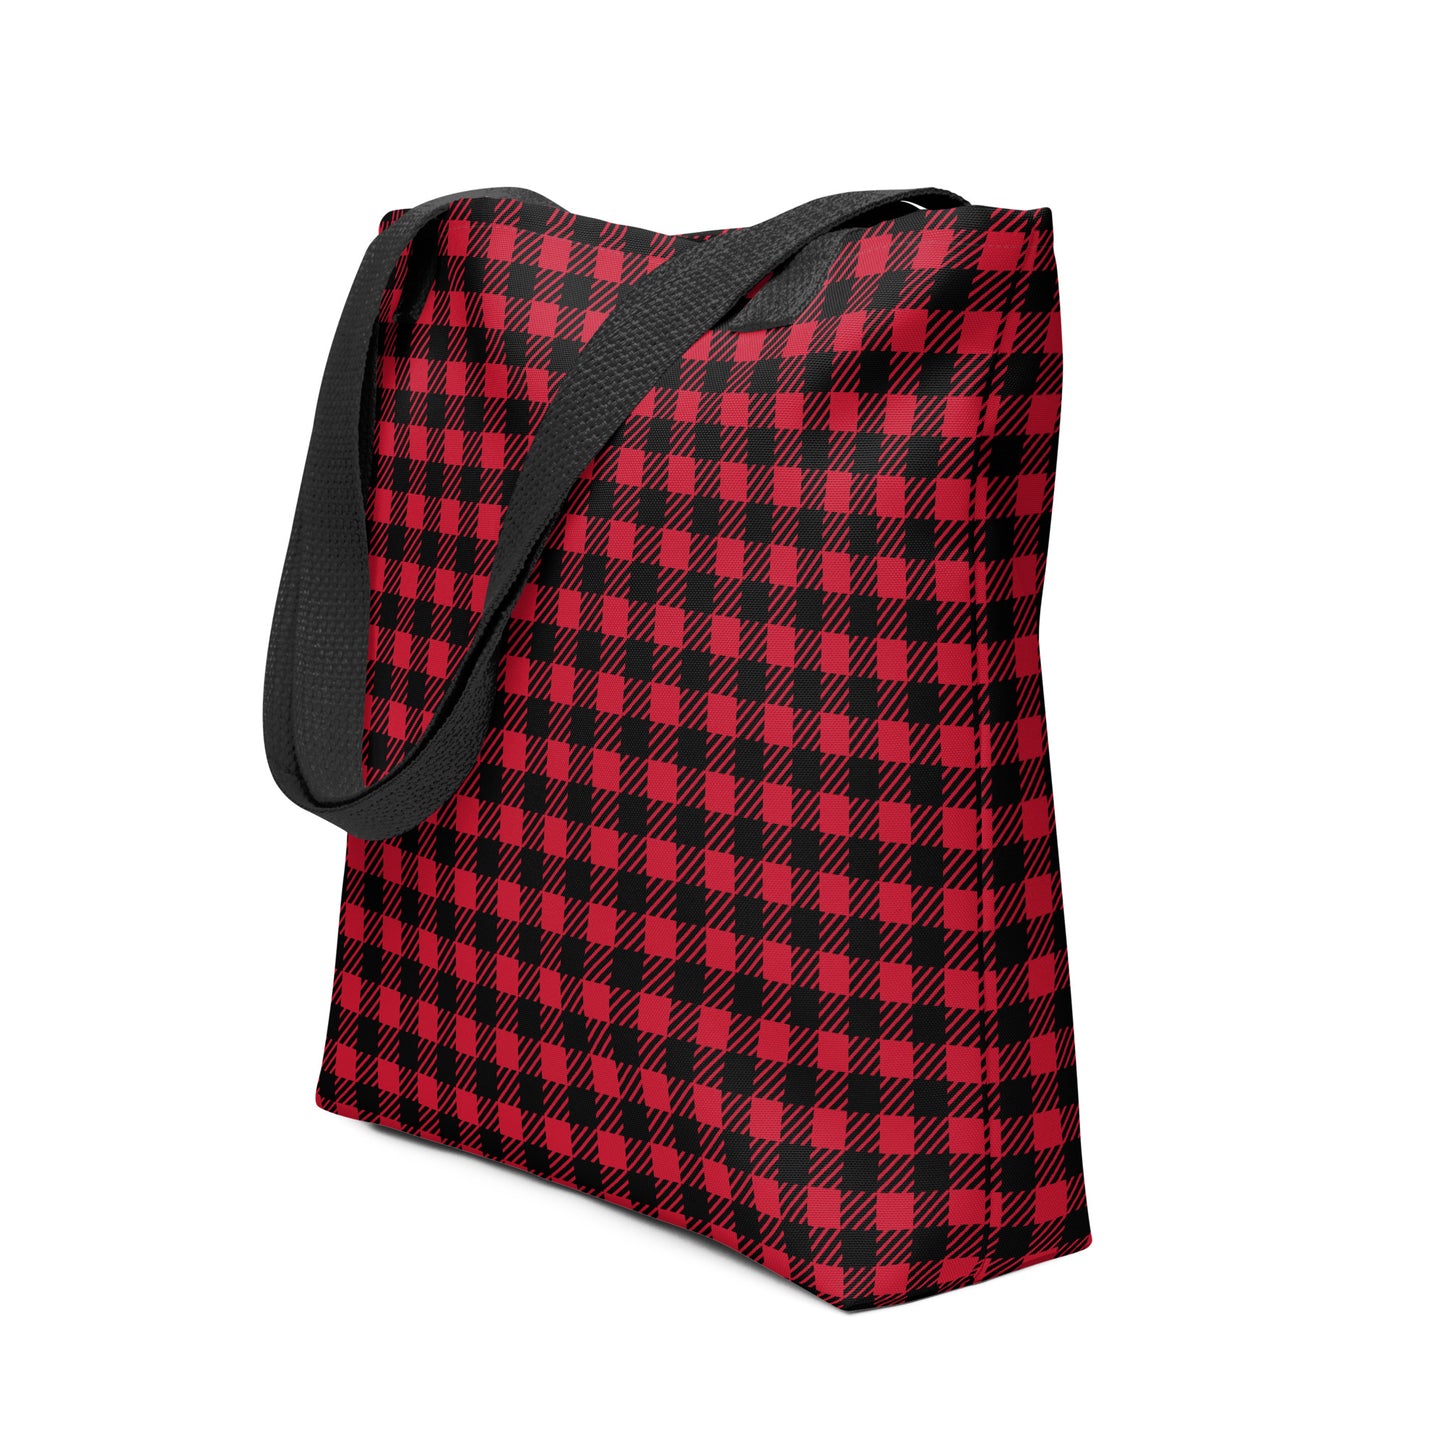 Red and Black Checkered Tote Bag